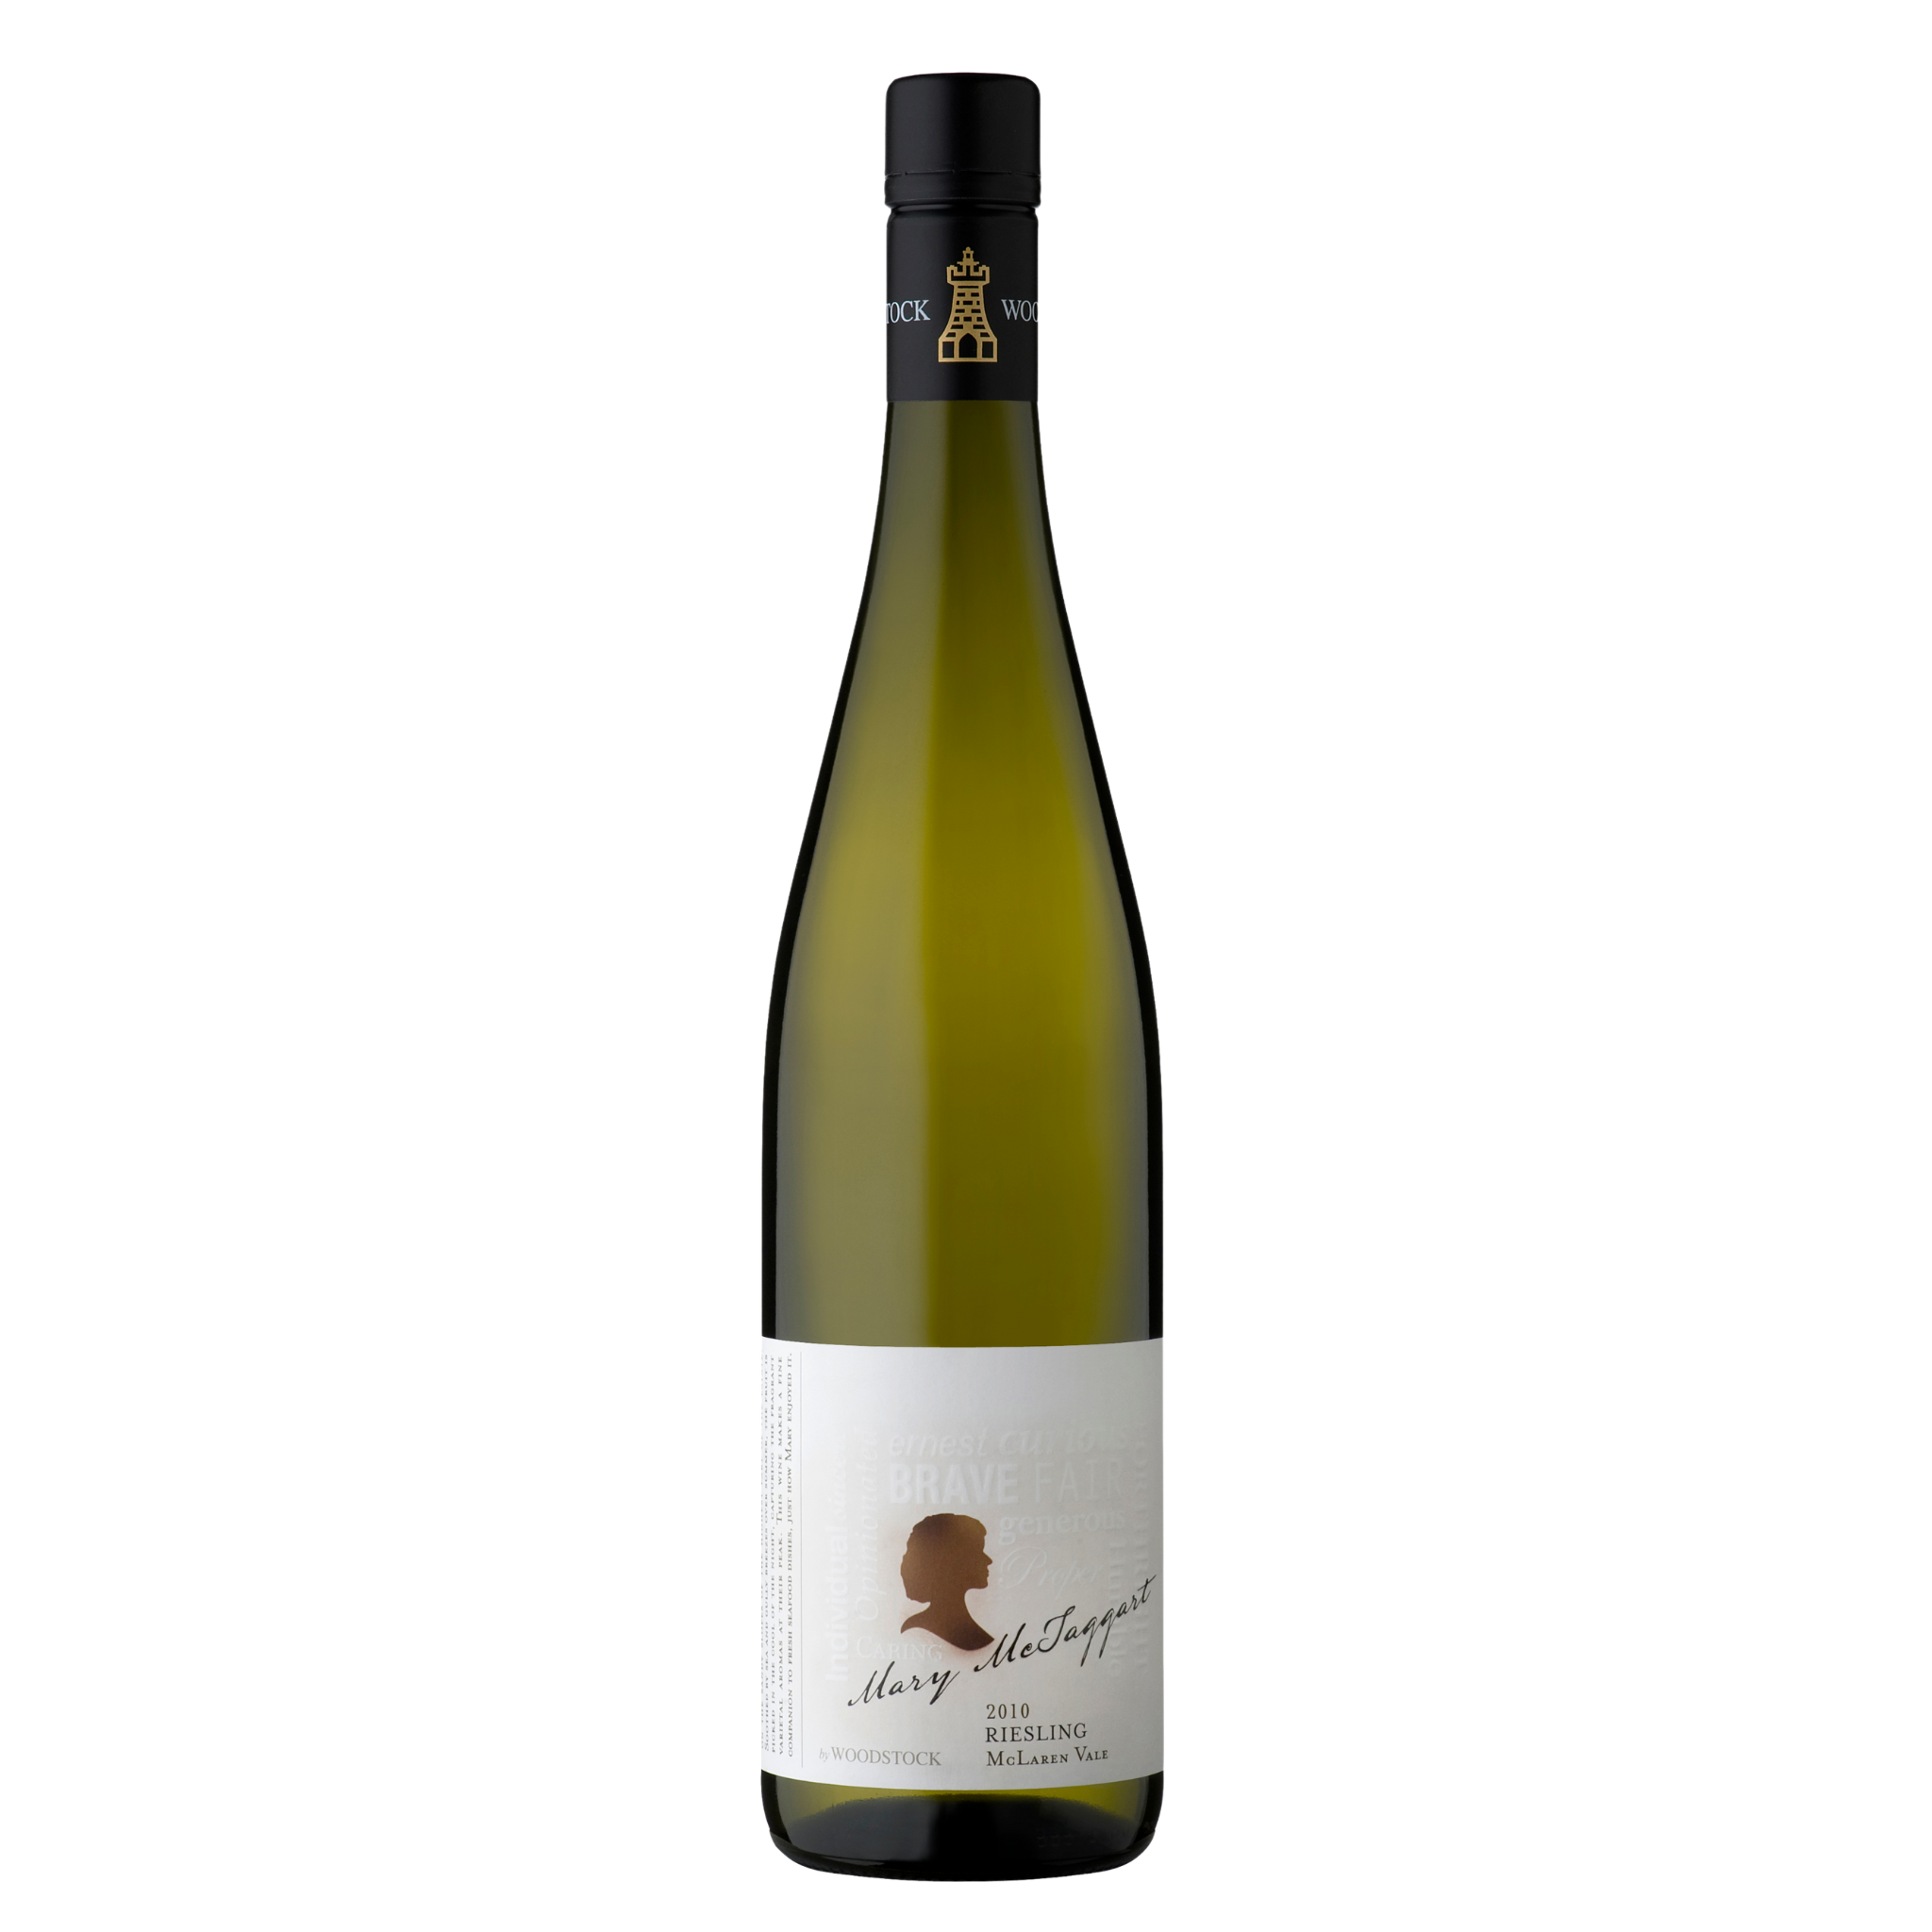 Museum Release 'Mary McTaggart' Riesling 2010